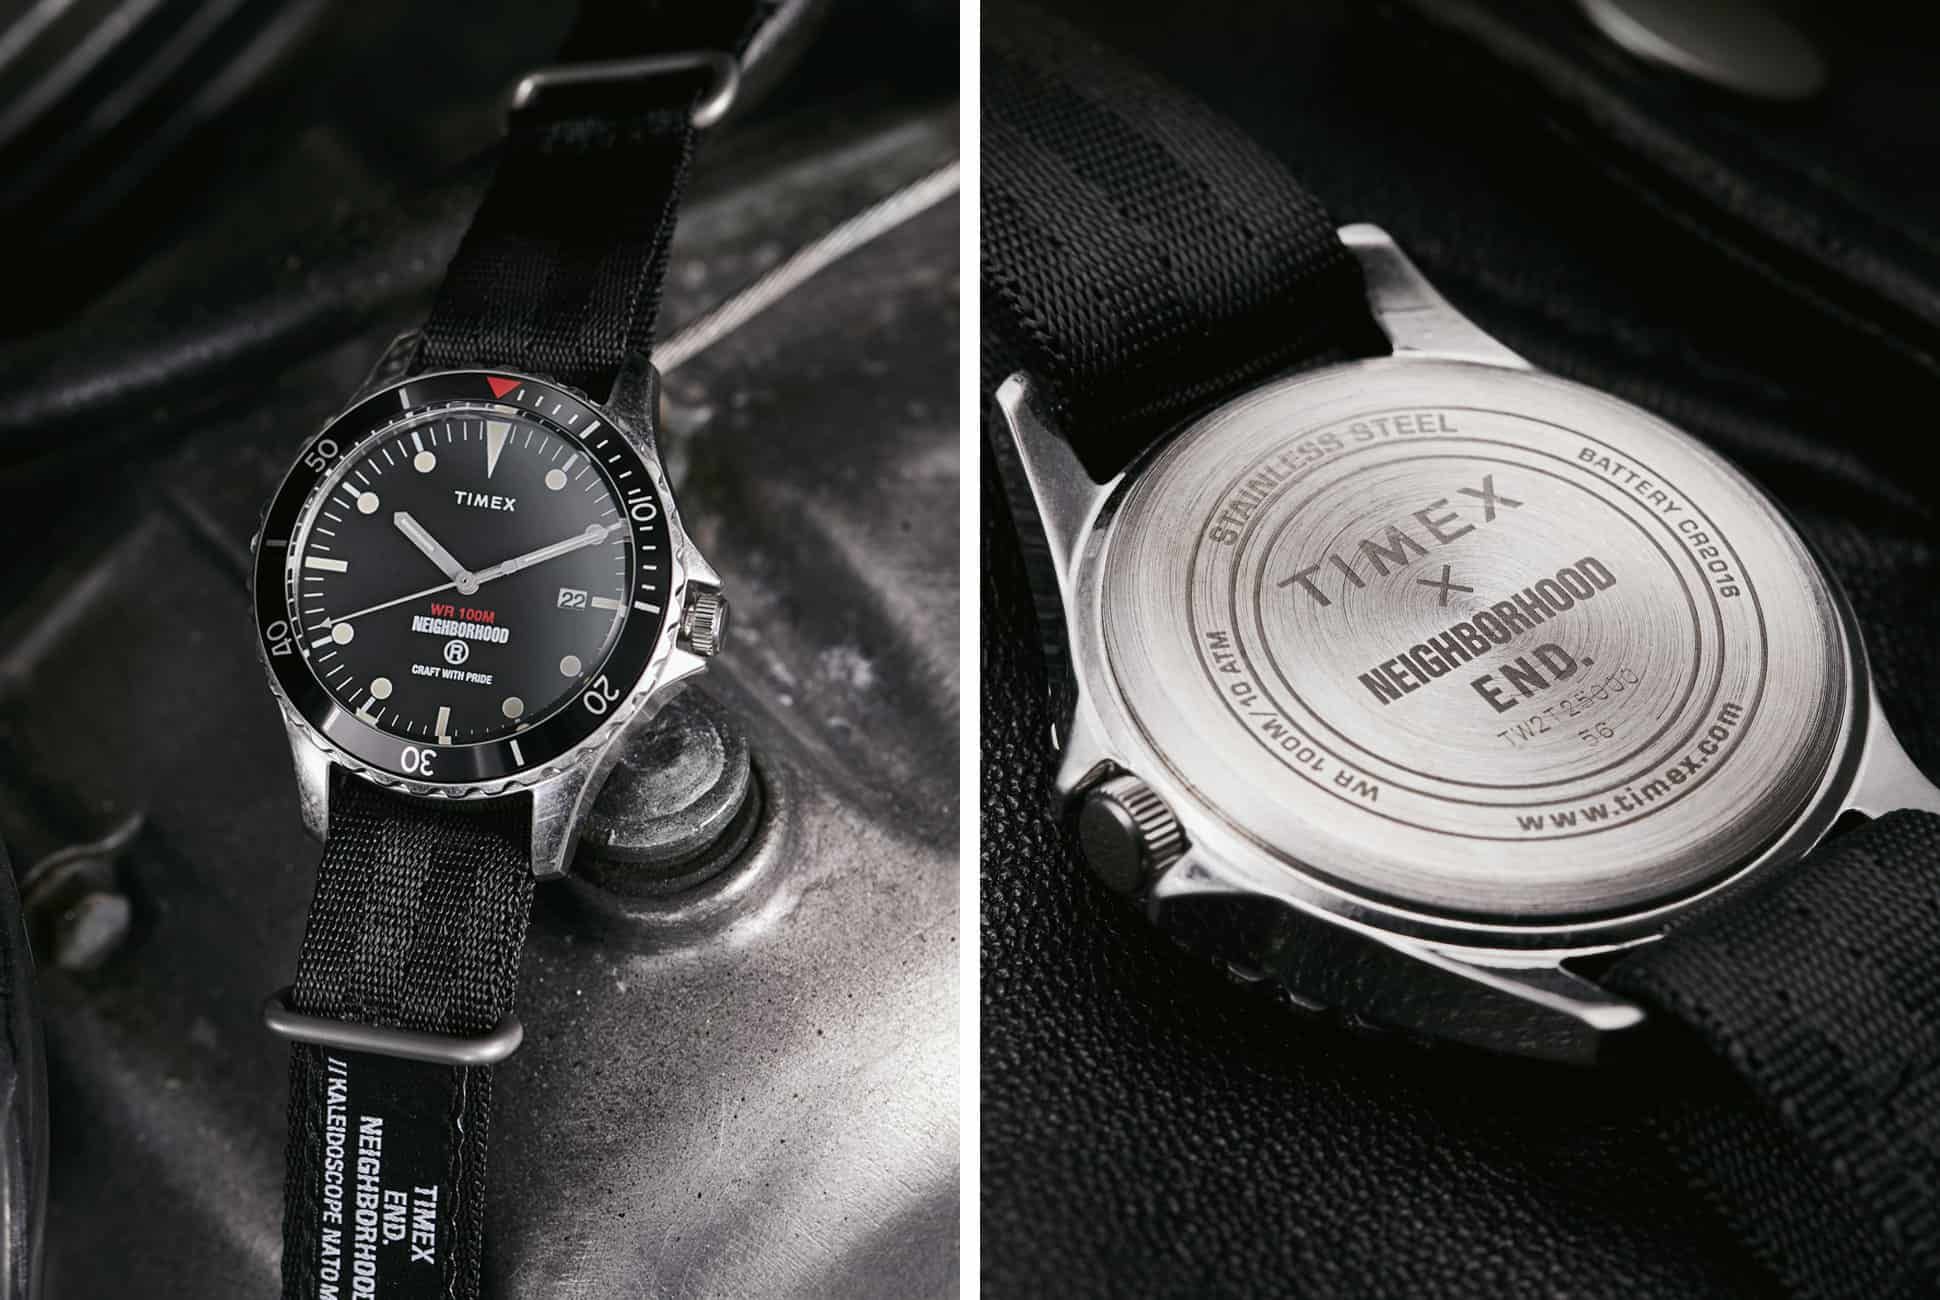 This Military-Inspired Timex is the Perfect Beater Watch